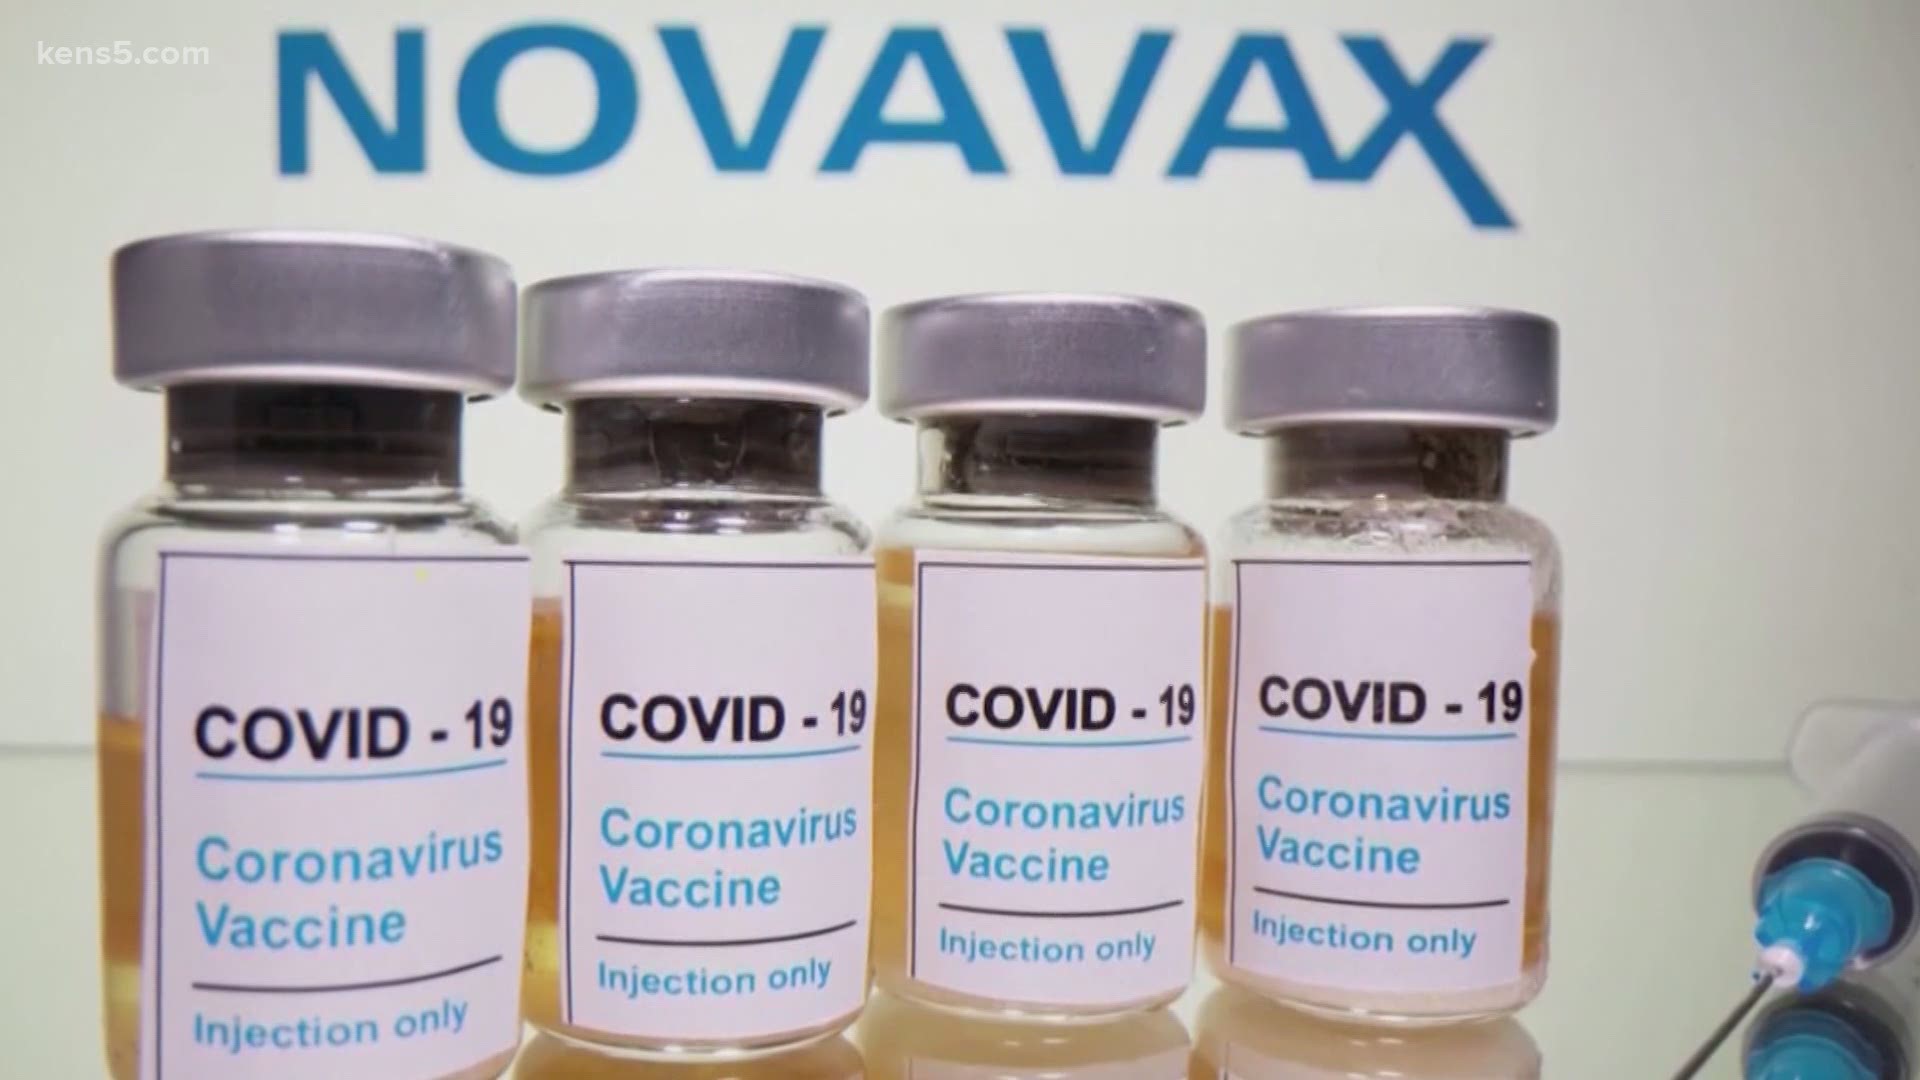 In Comal County, health authorities are unsure when more doses of the vaccine could arrive.